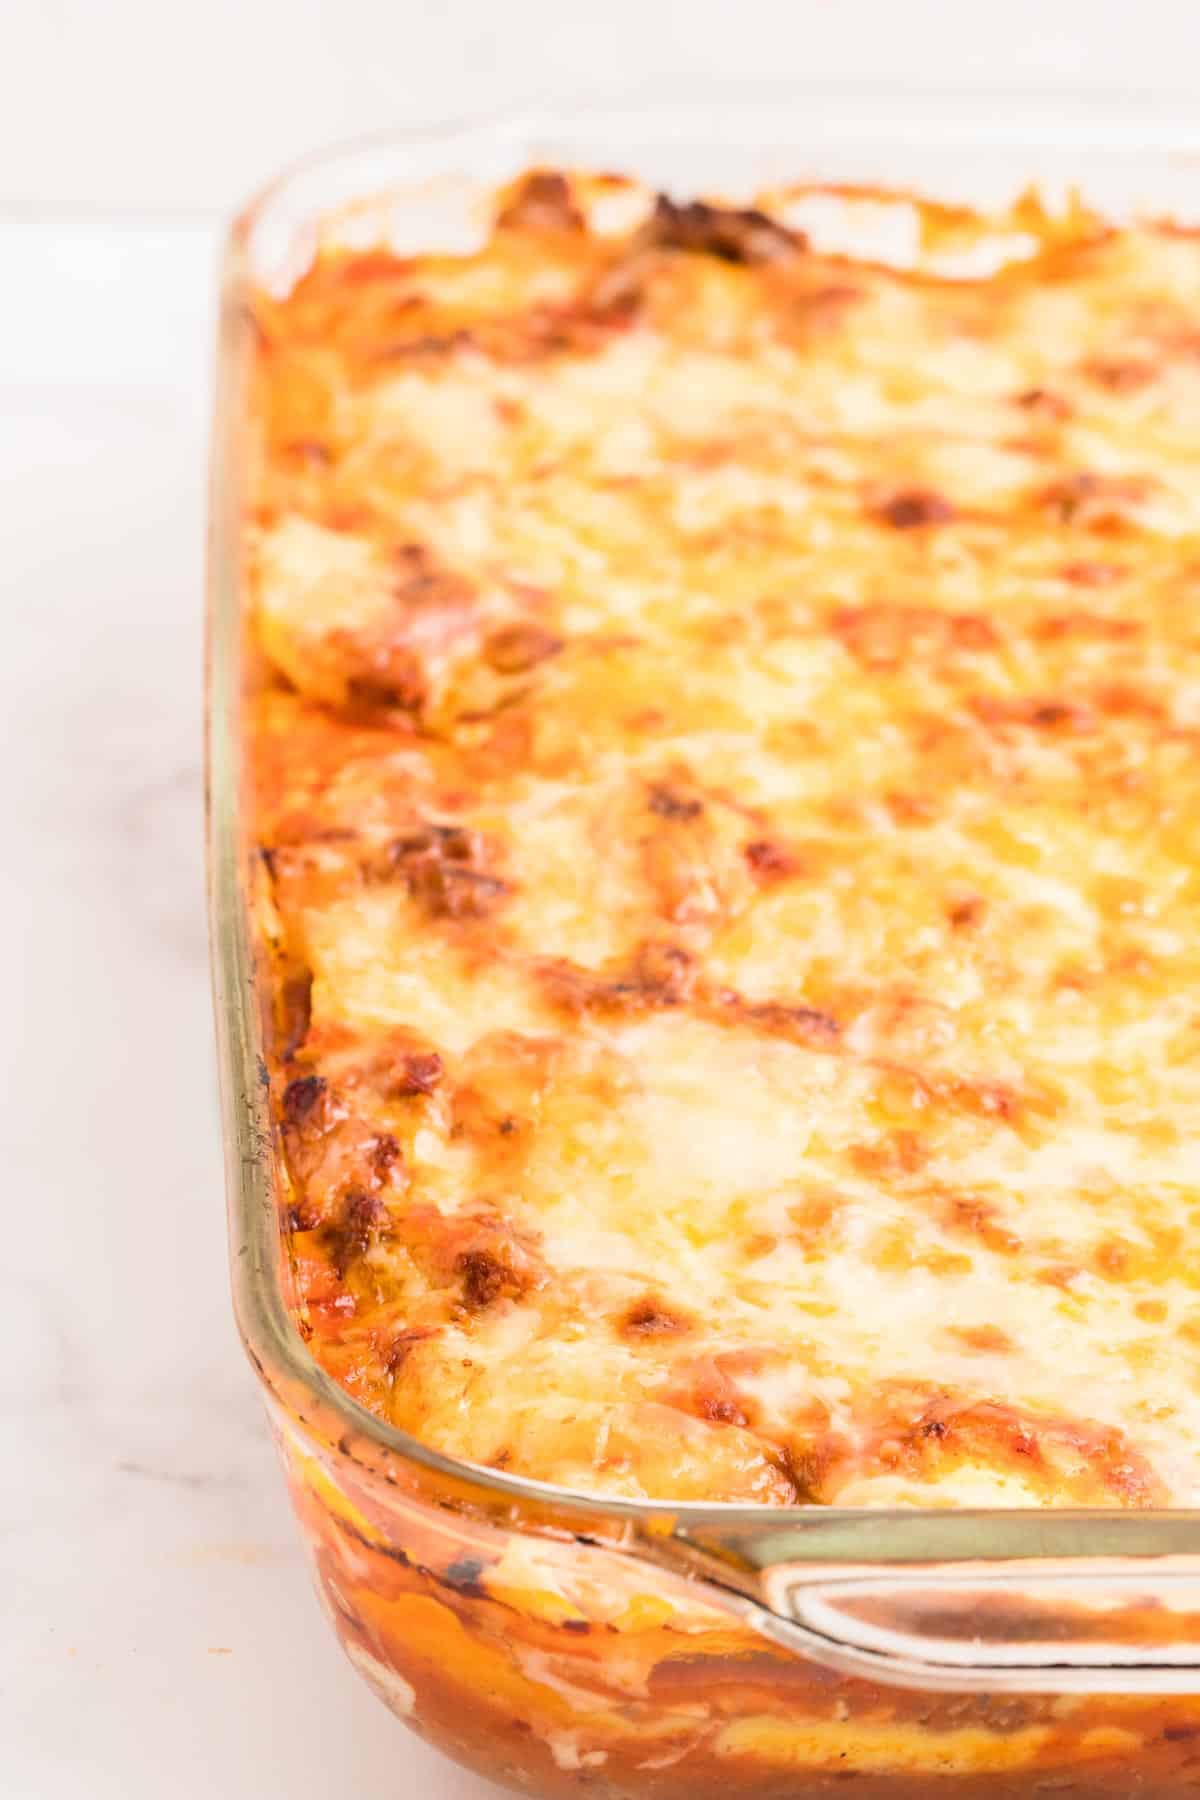 Our Lazy Lasagna straight out of the oven